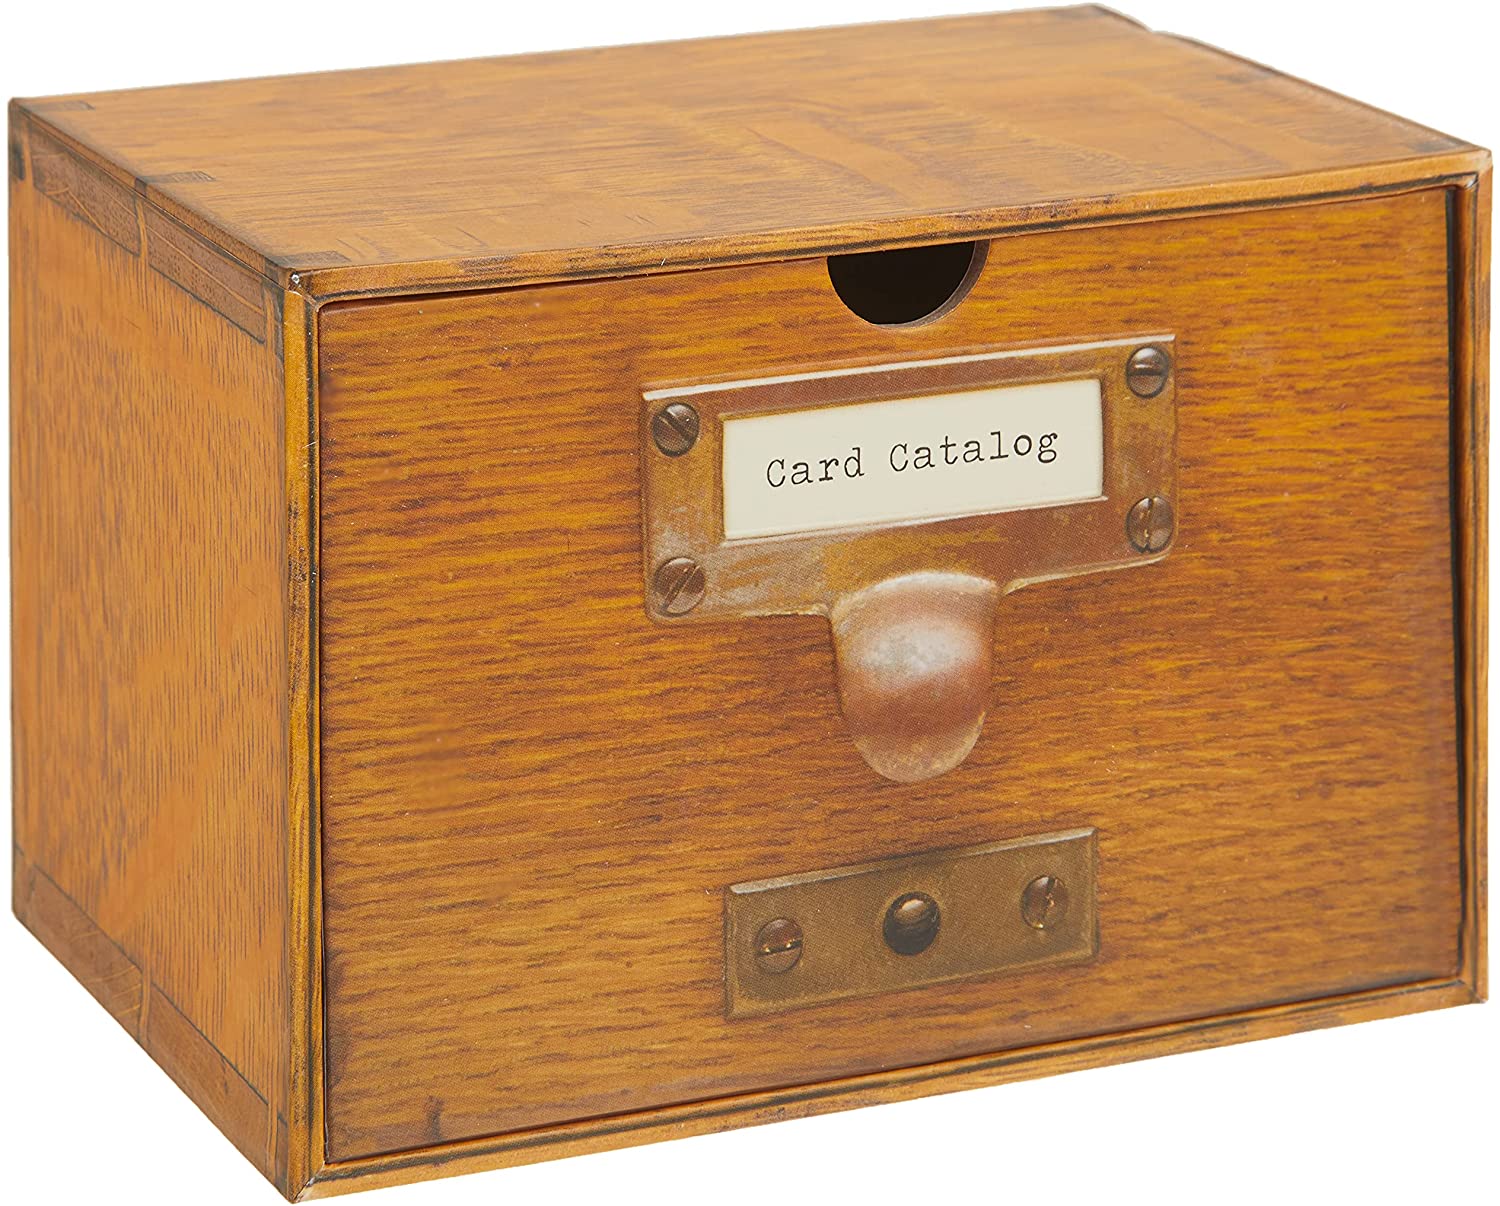 Card Catalog: 30 Notecards from the Library of Congress (Novelty)